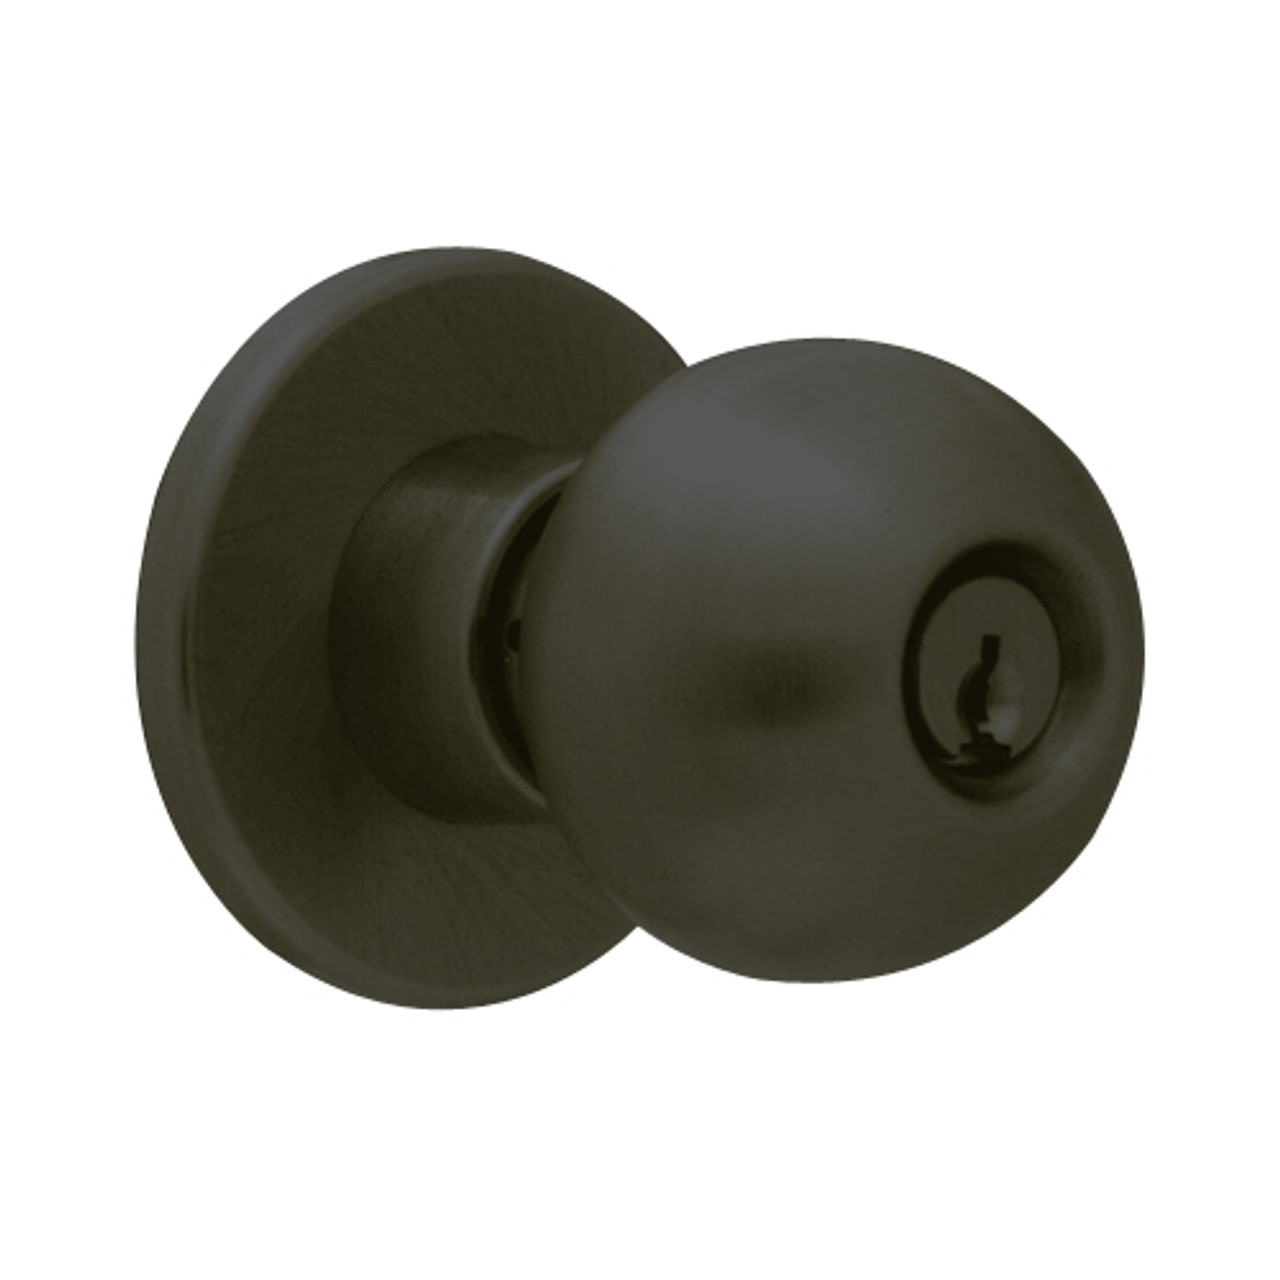 X571PD-HG-613 Falcon X Series Cylindrical Dormitory Lock with Hana-Gala Knob Style in Oil Rubbed Bronze Finish